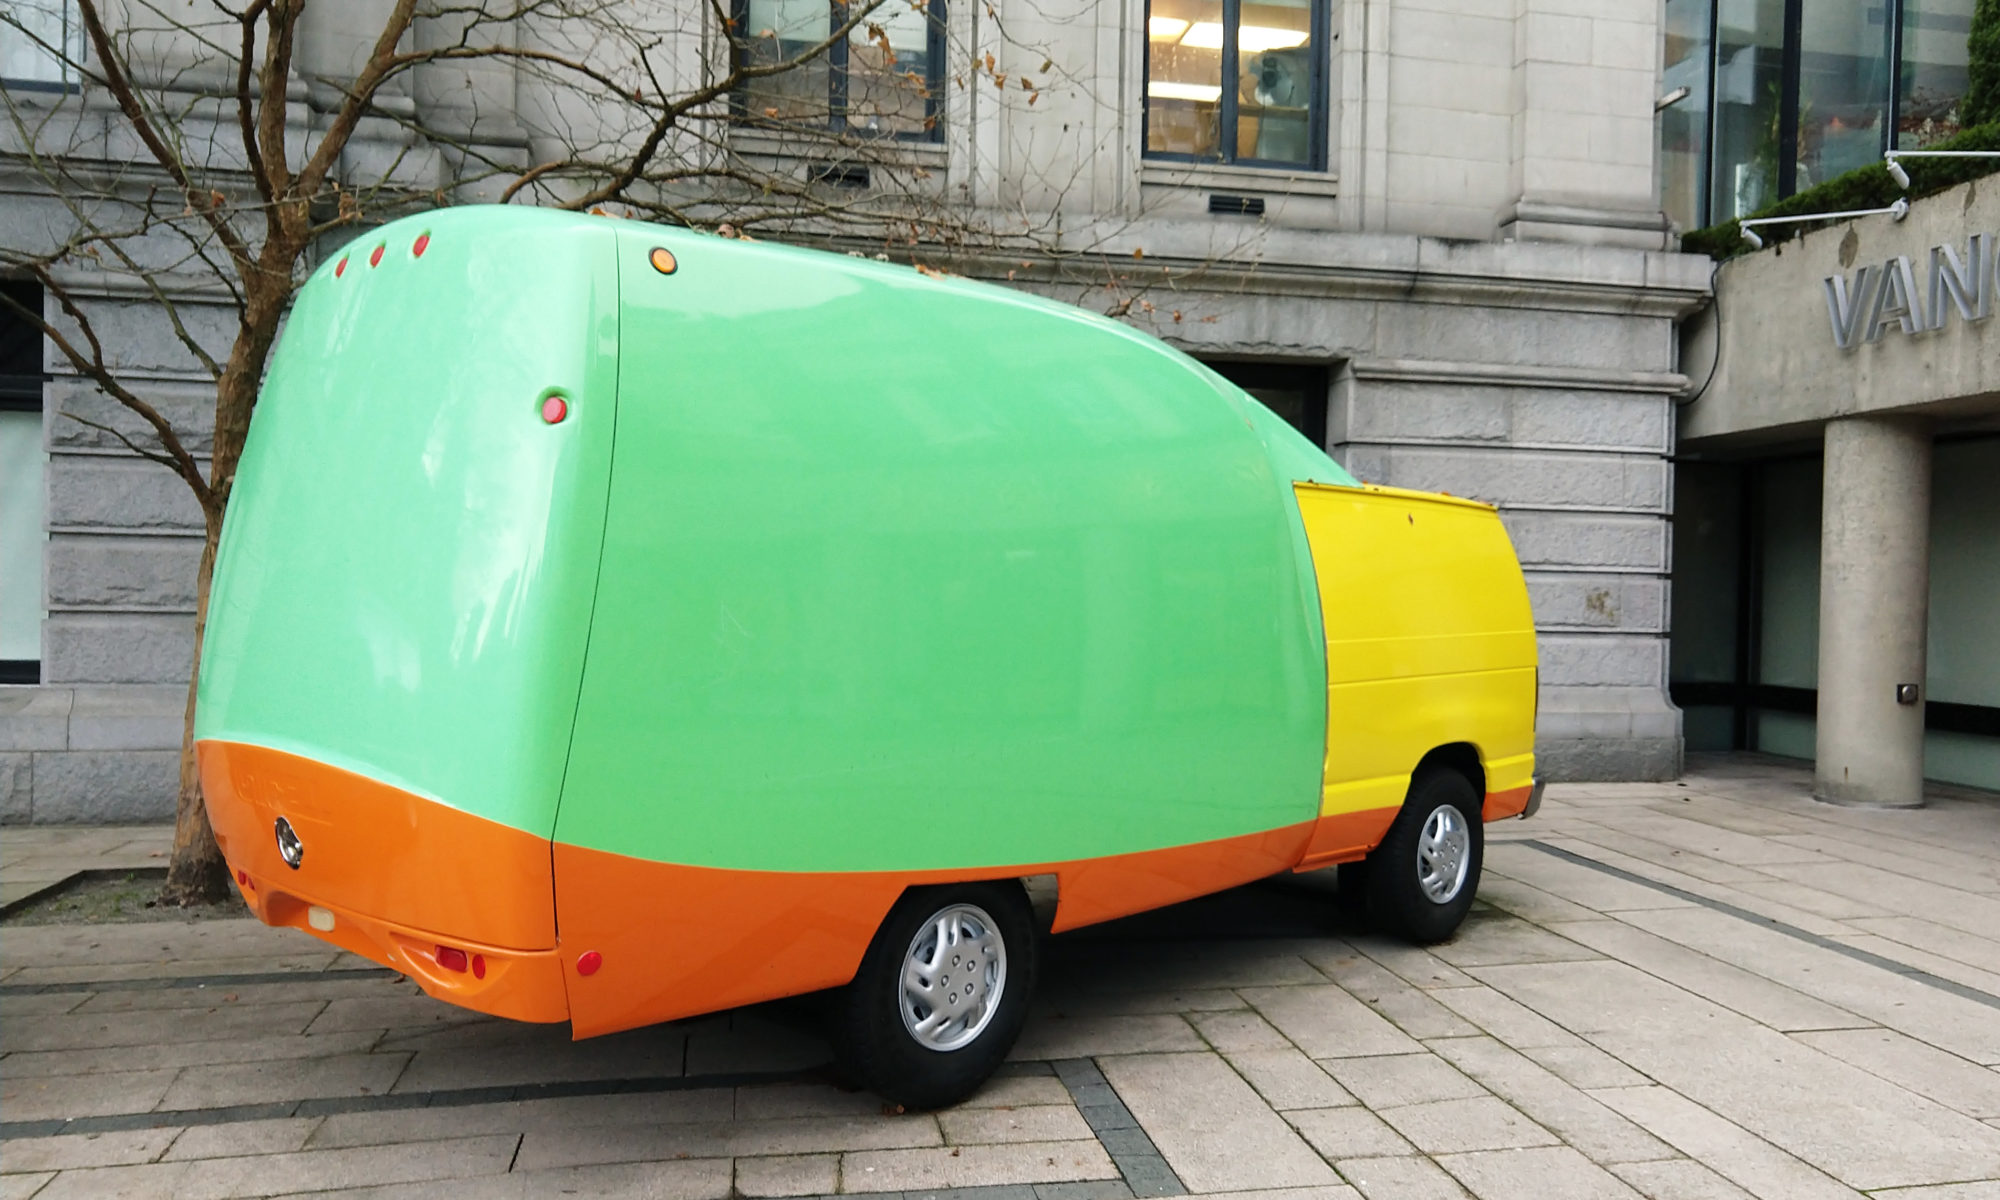 image of van used in affinity mapping brainstorm header image delightability website